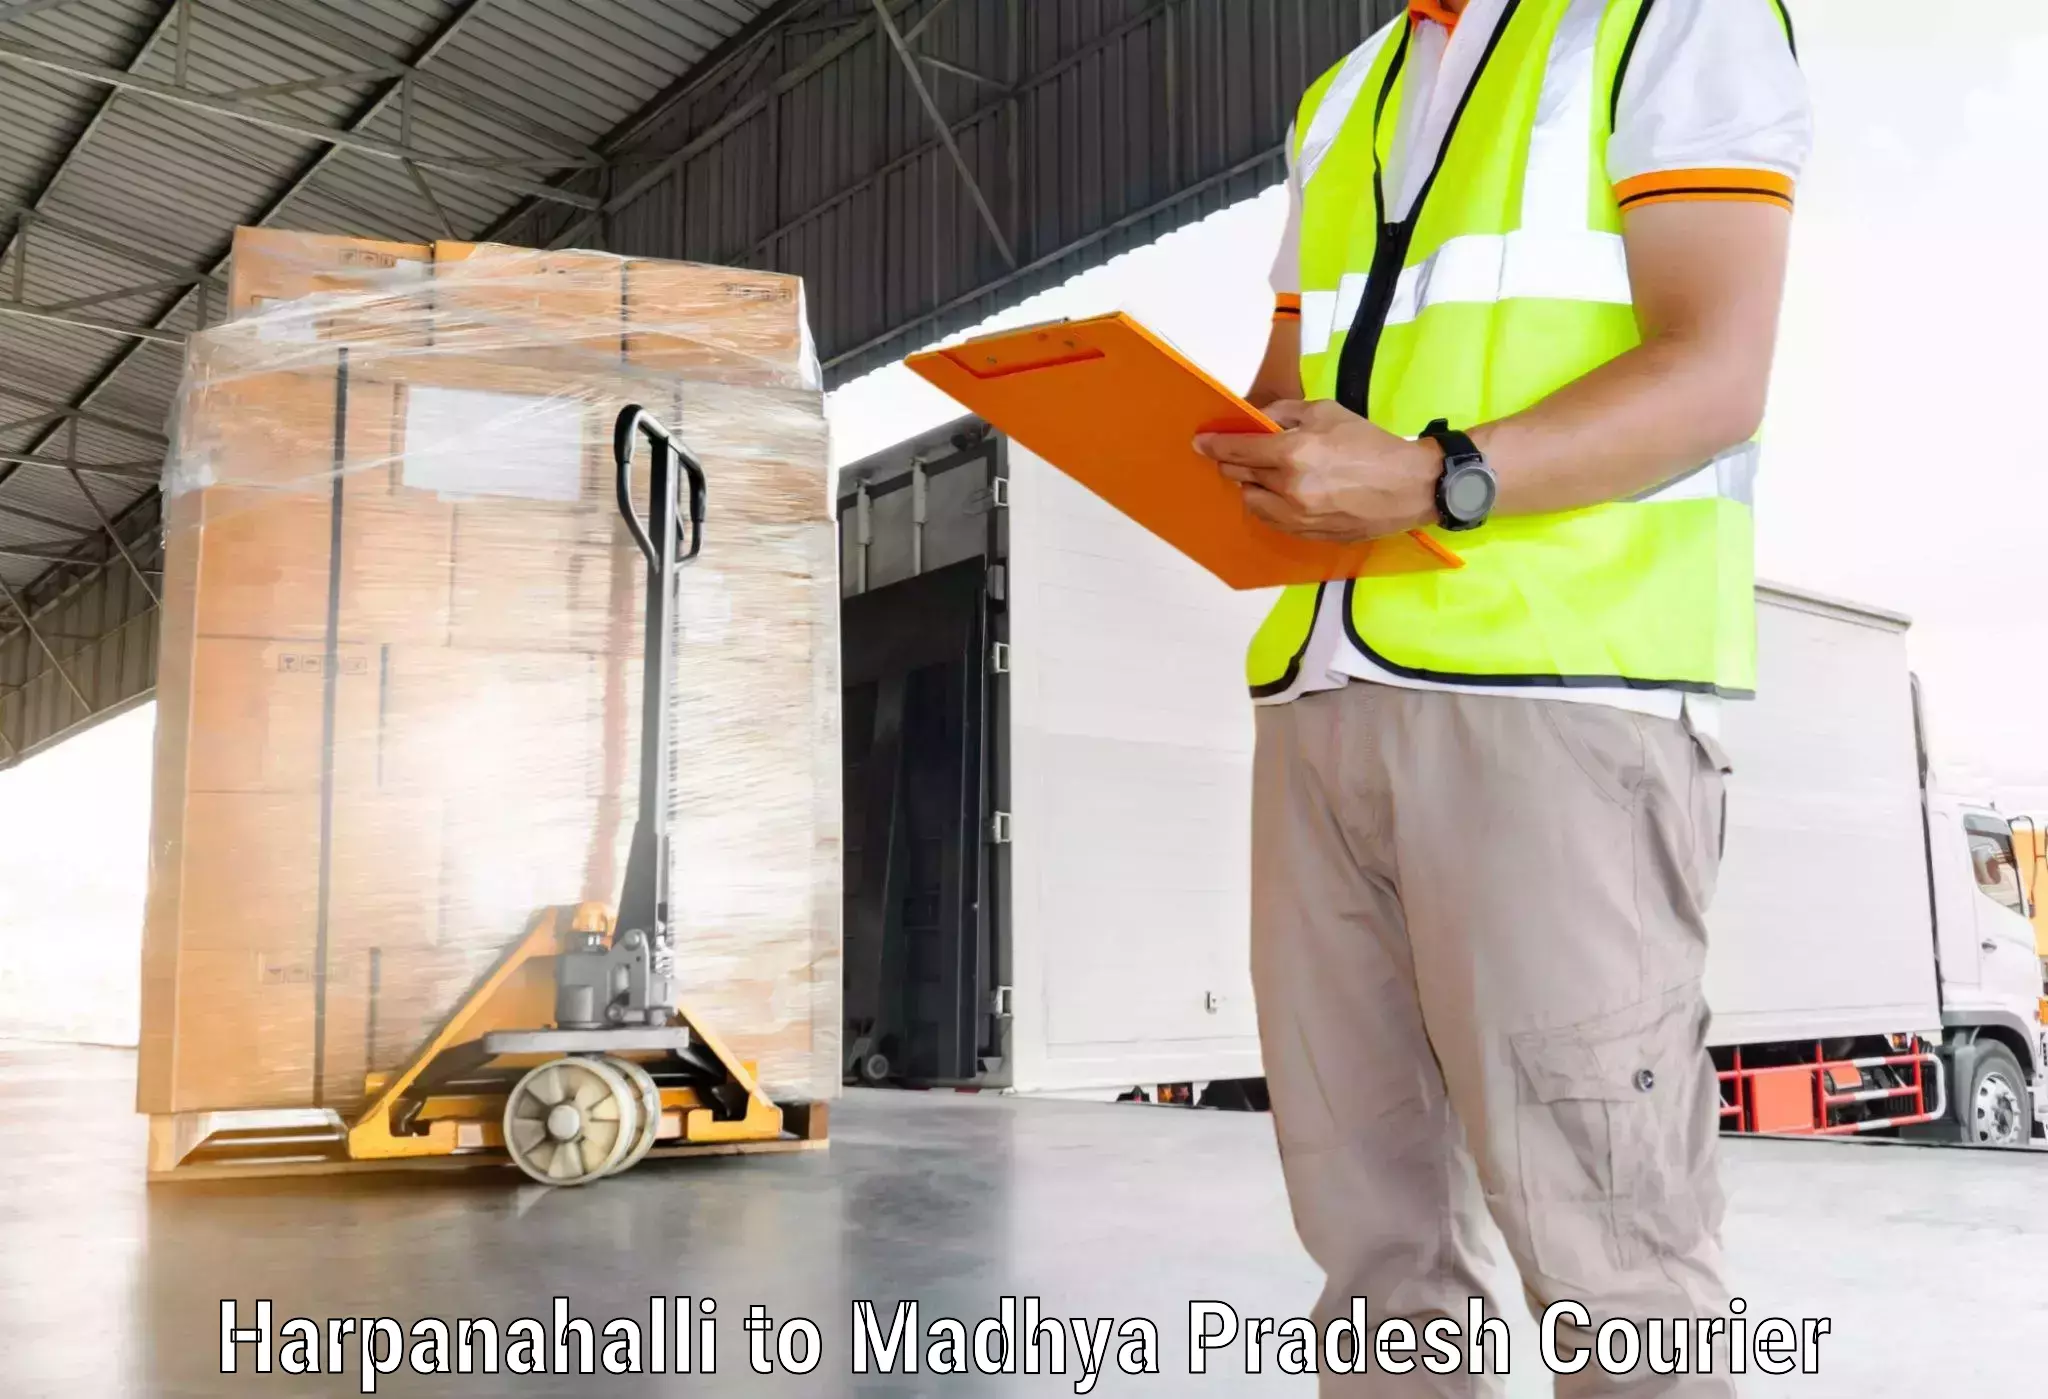 Easy access courier services Harpanahalli to Madhya Pradesh